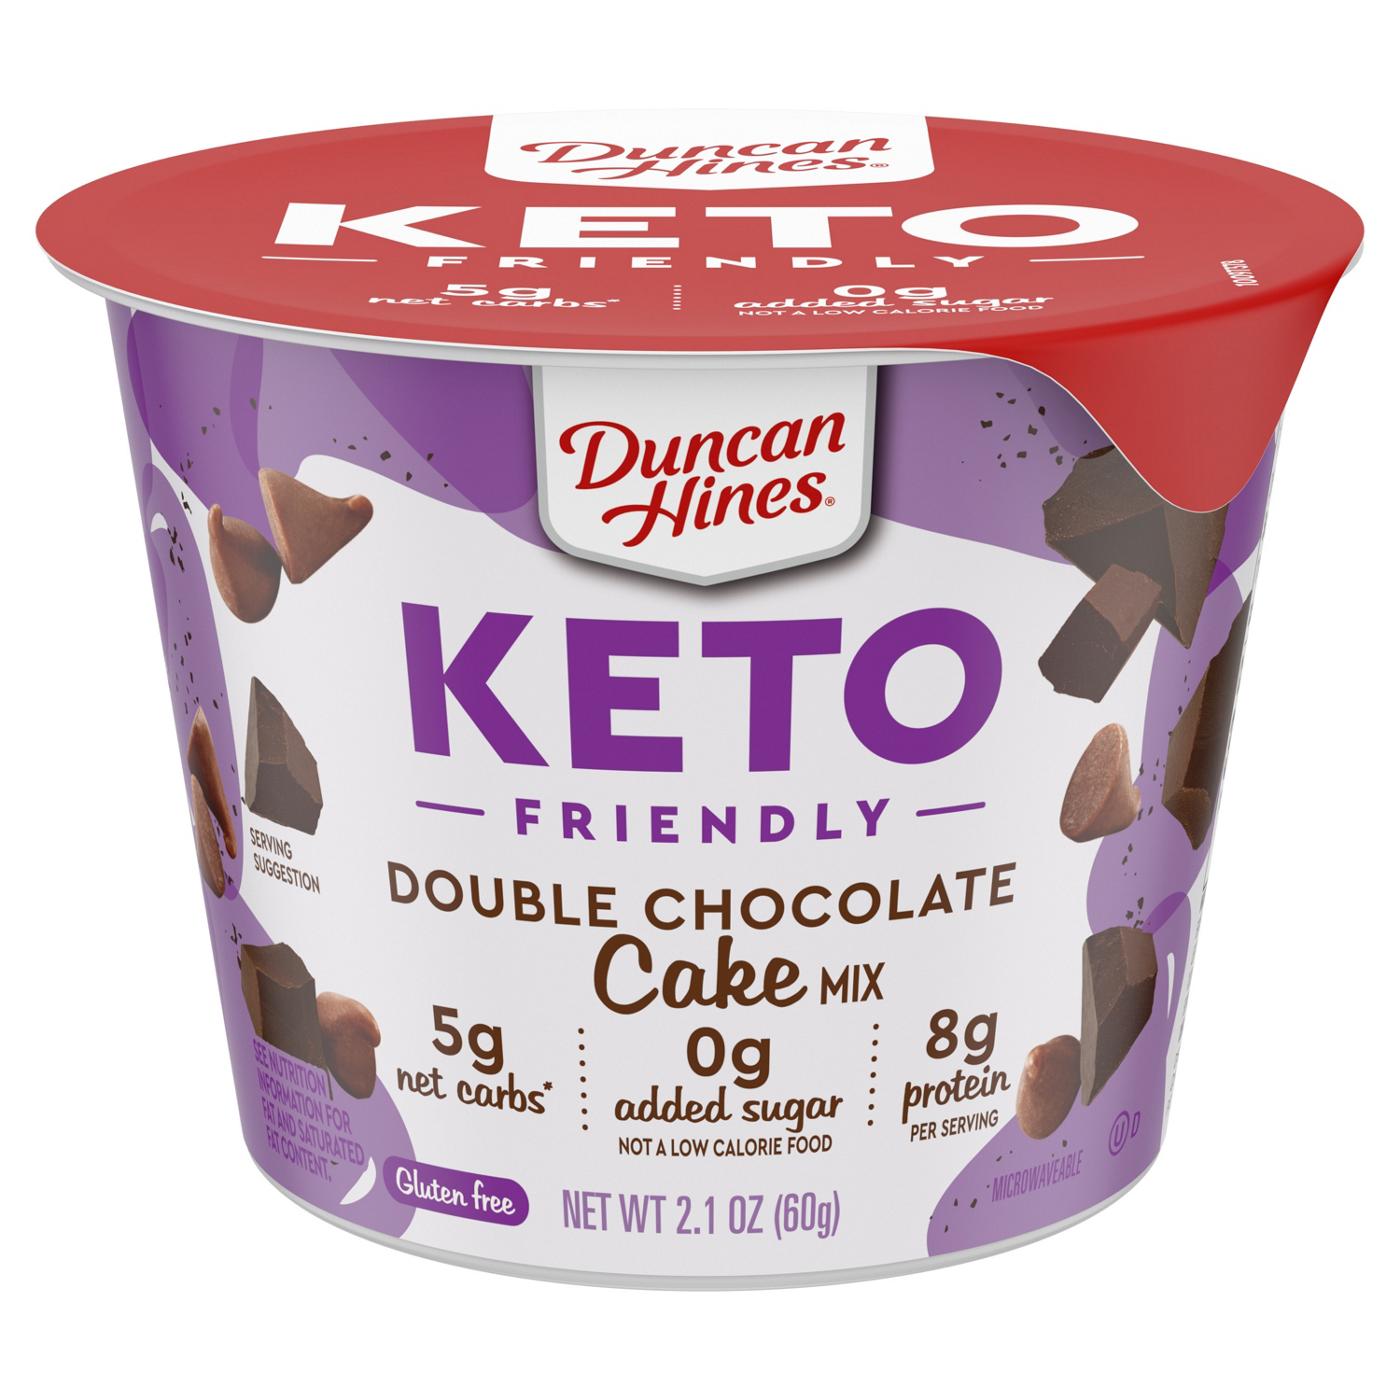 Duncan Hines Keto Friendly Double Chocolate Cake Mix; image 1 of 7